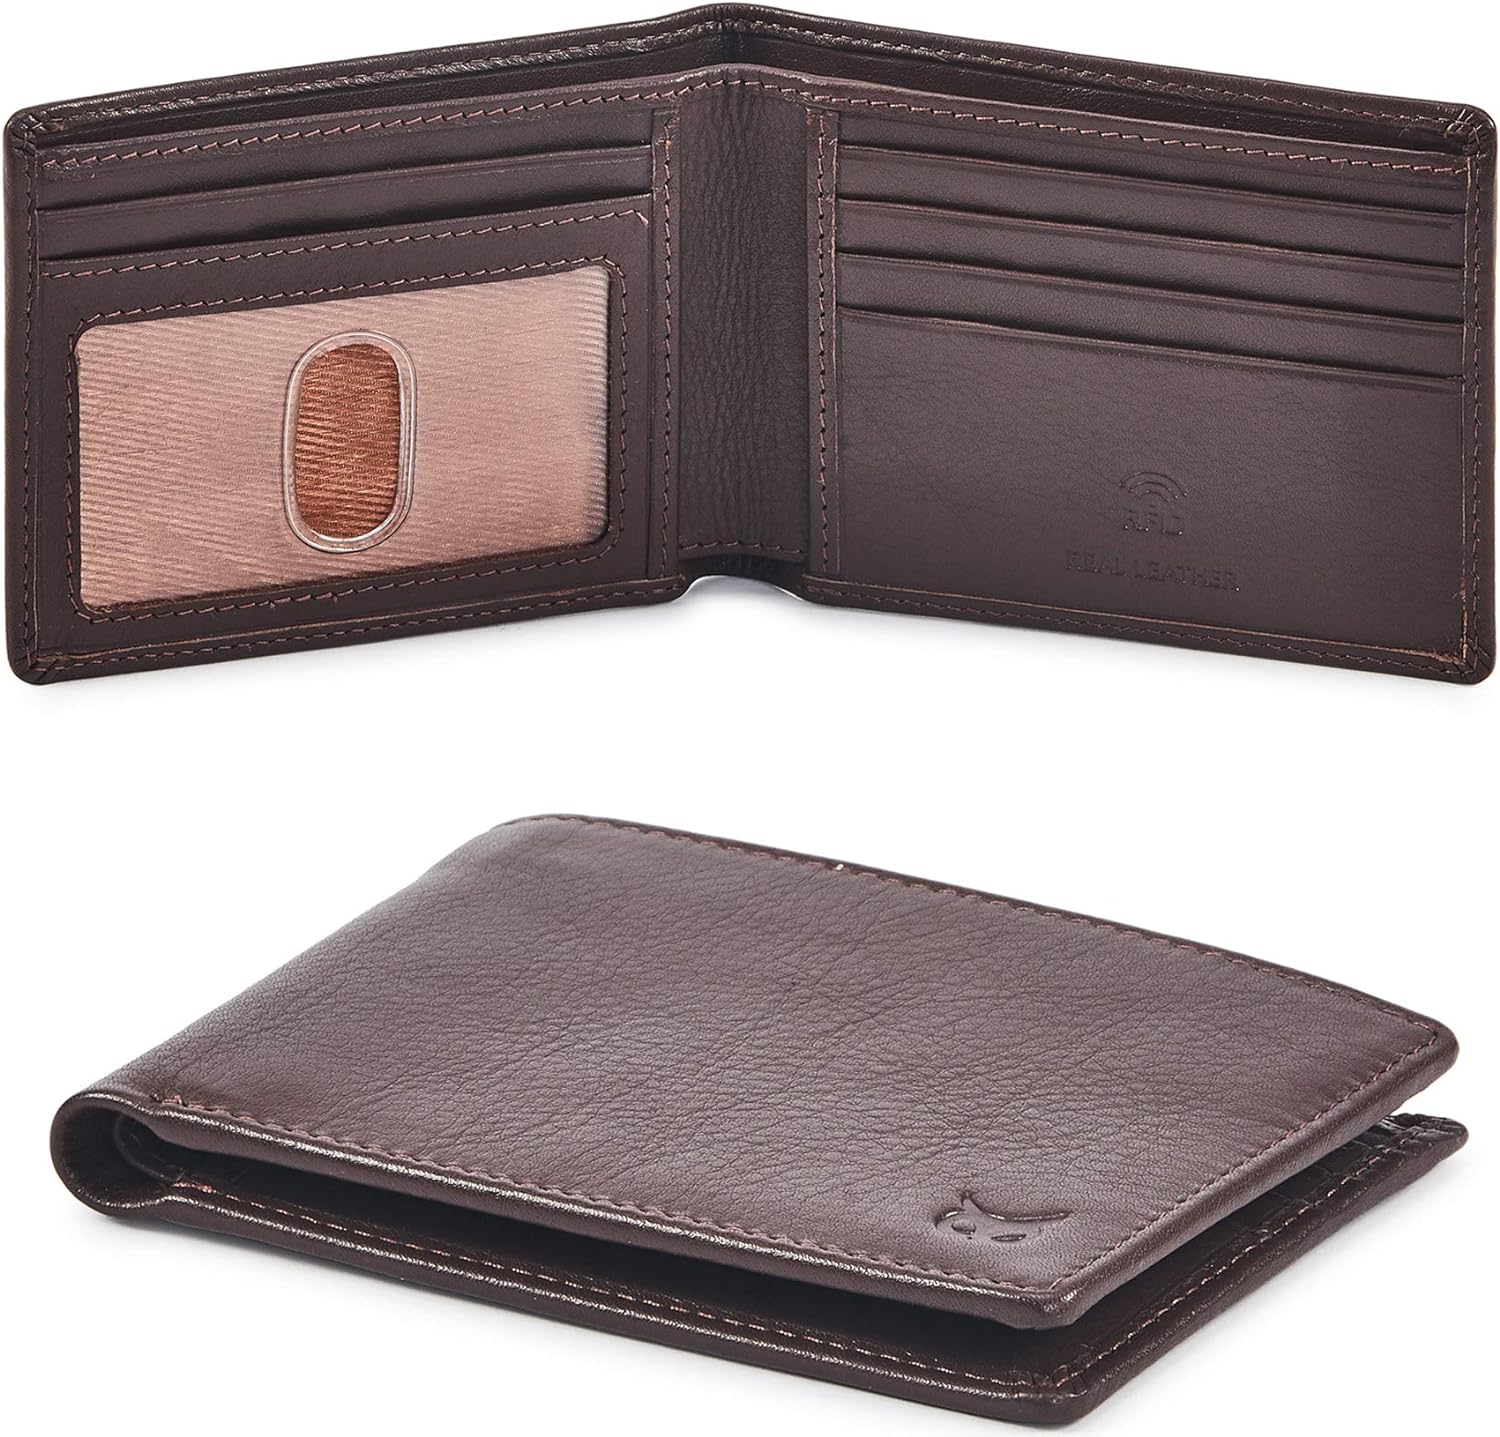 Wise Owl Accessories Real Leather Mens Bifold Wallet